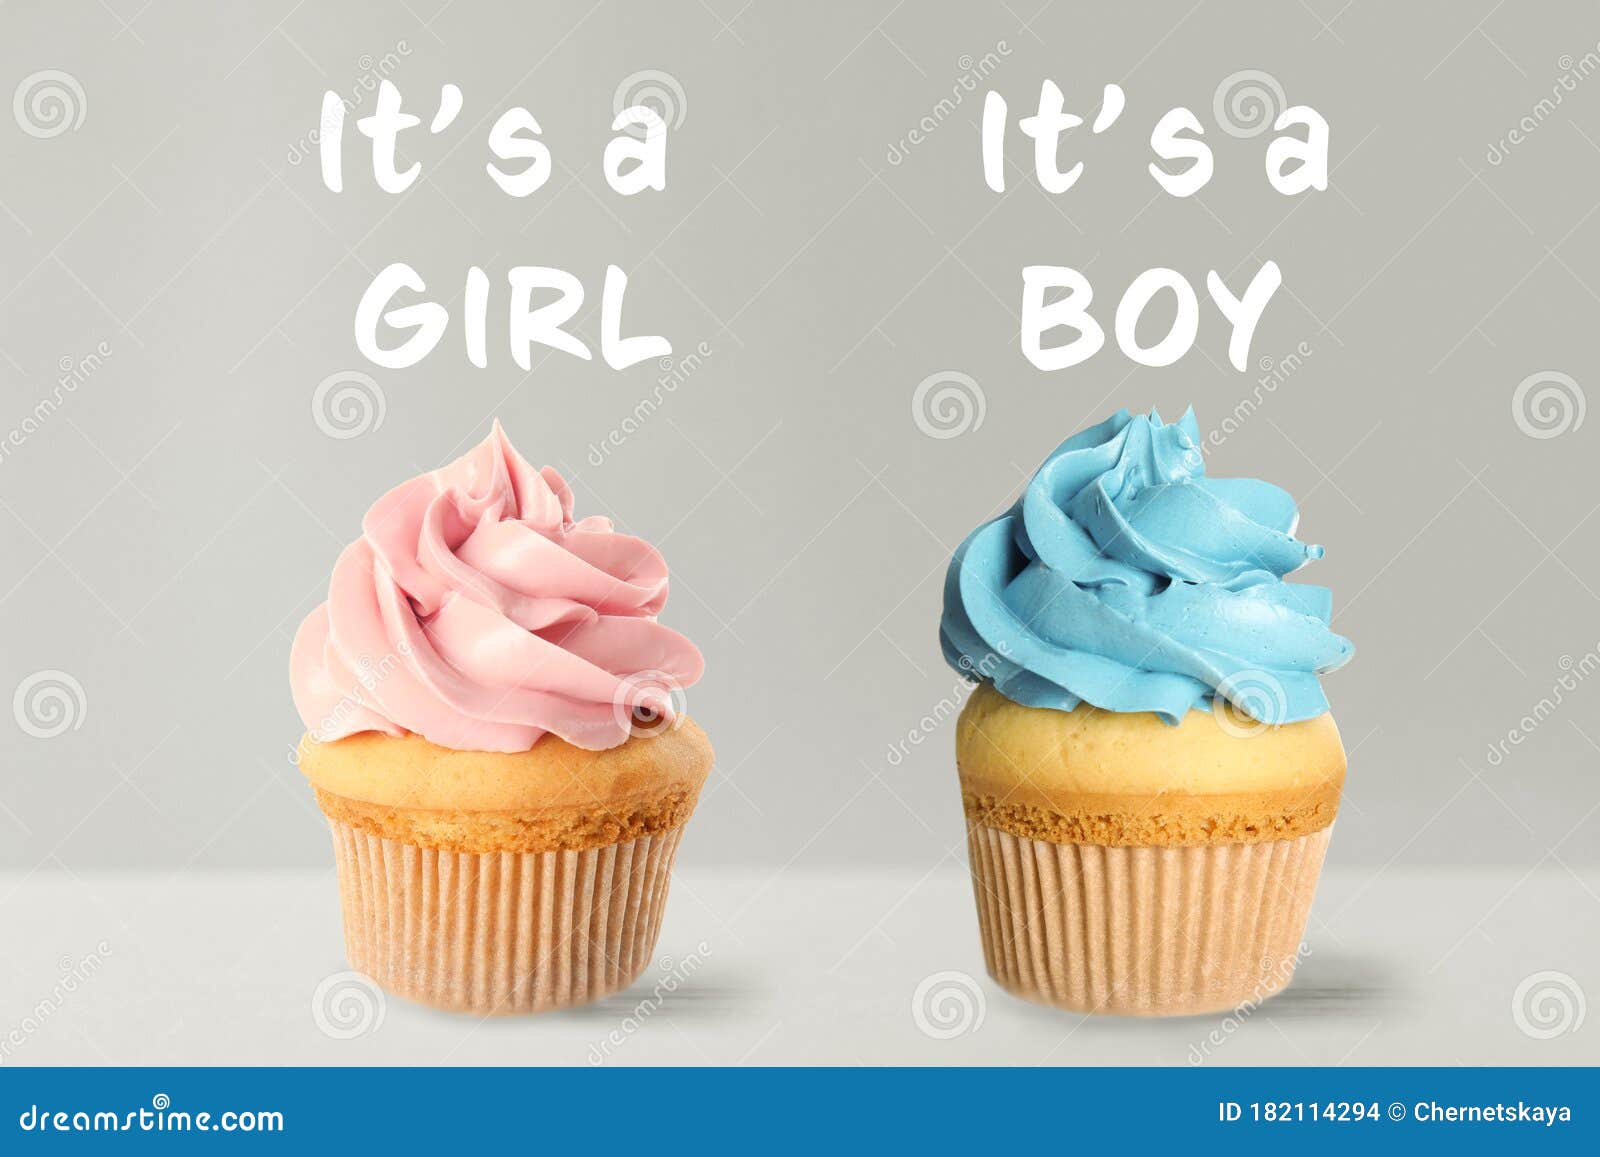 Baby Shower Cupcakes for Boy and Girl on Background Stock Photo - Image ...